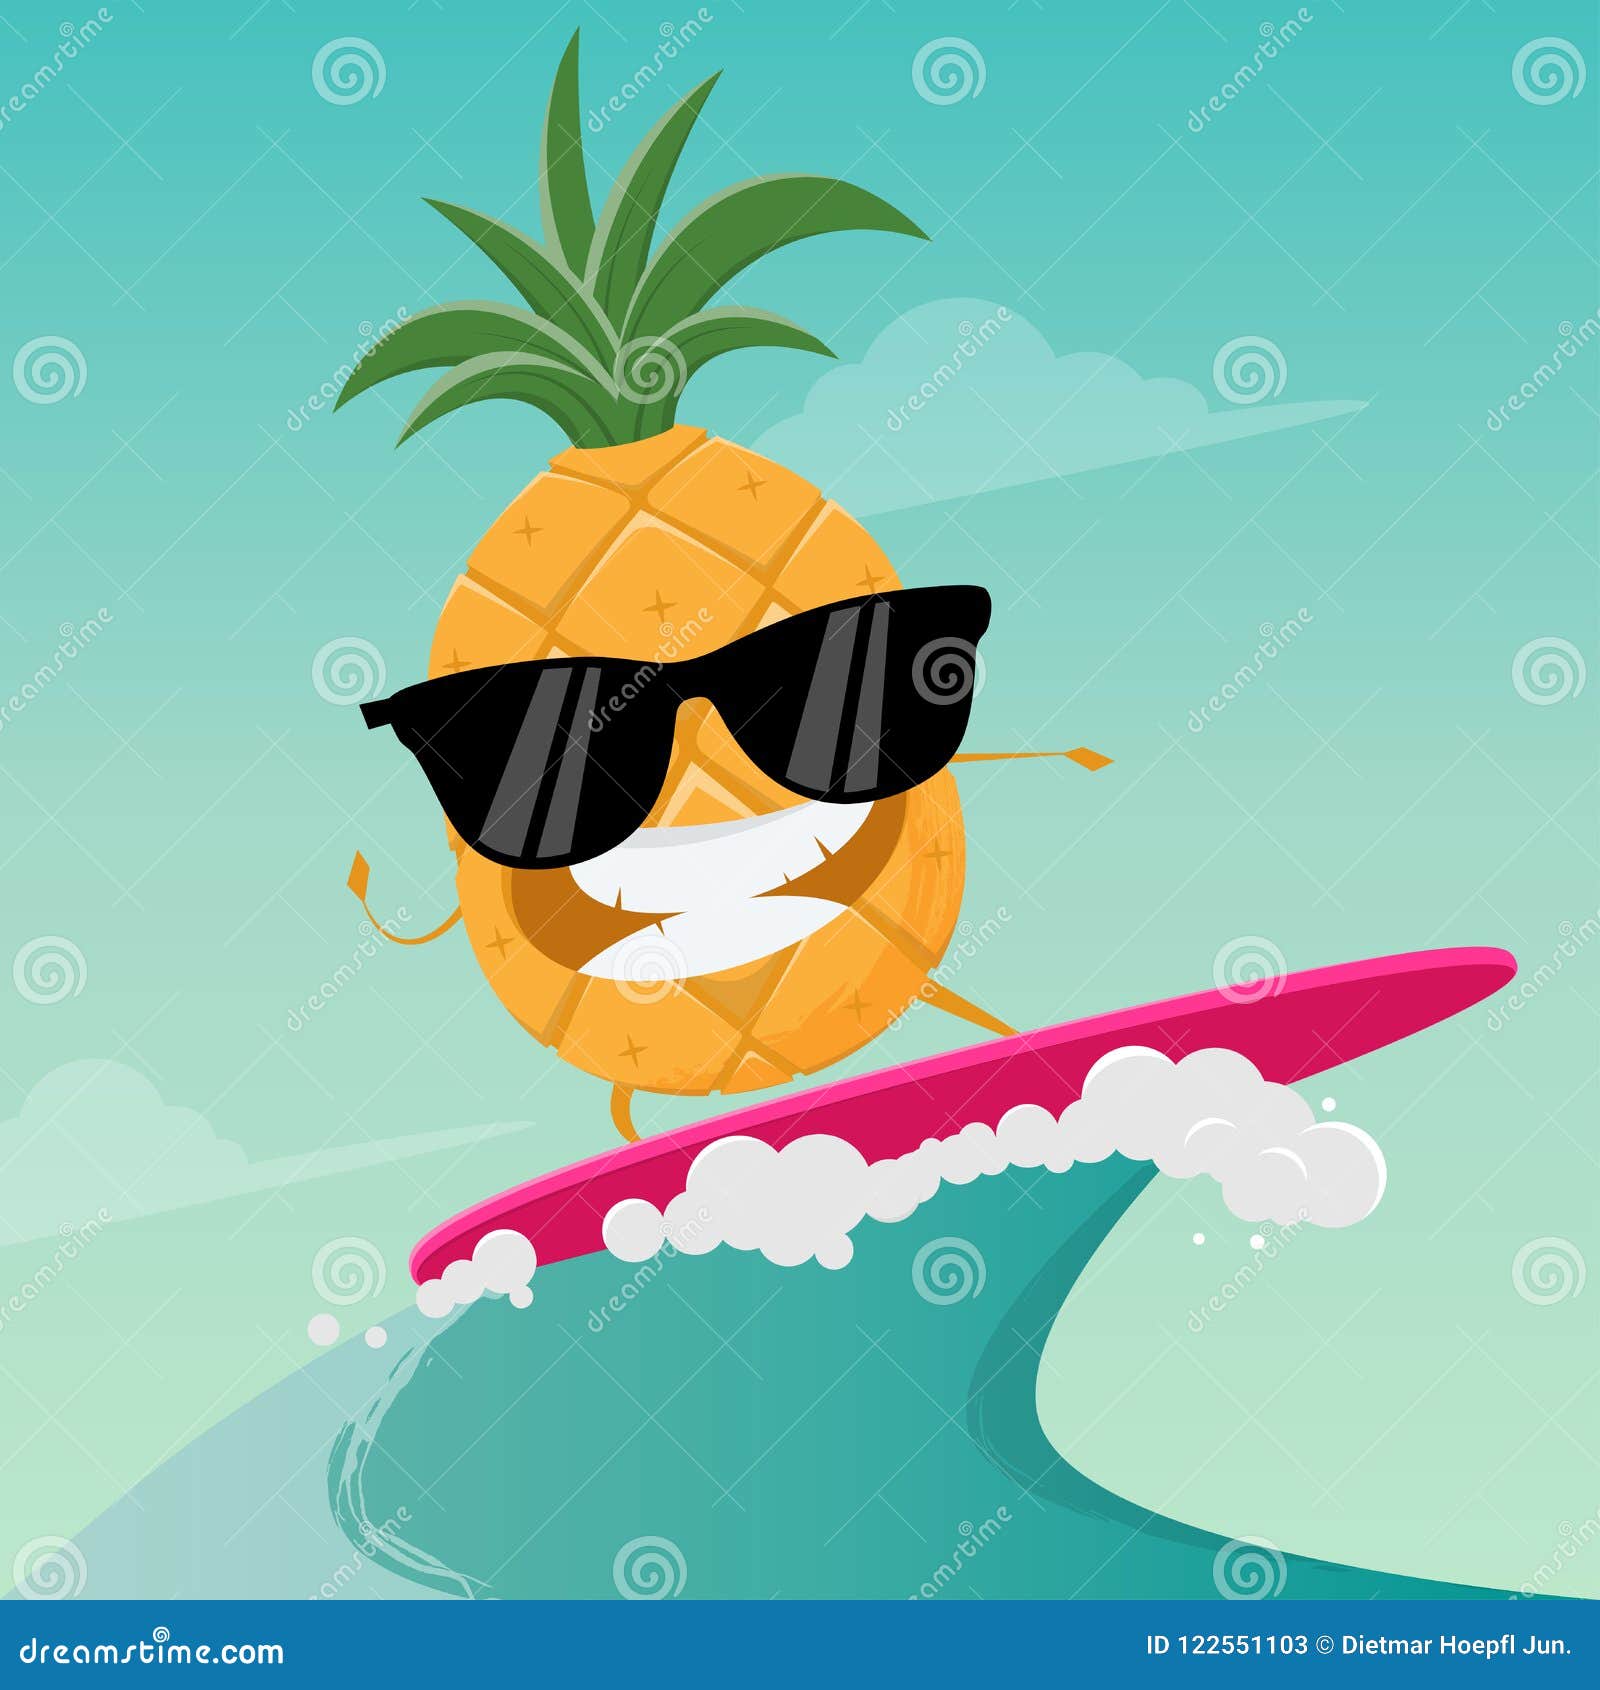 Funny Cartoon Of A Surfing Pineapple Stock Vector ...